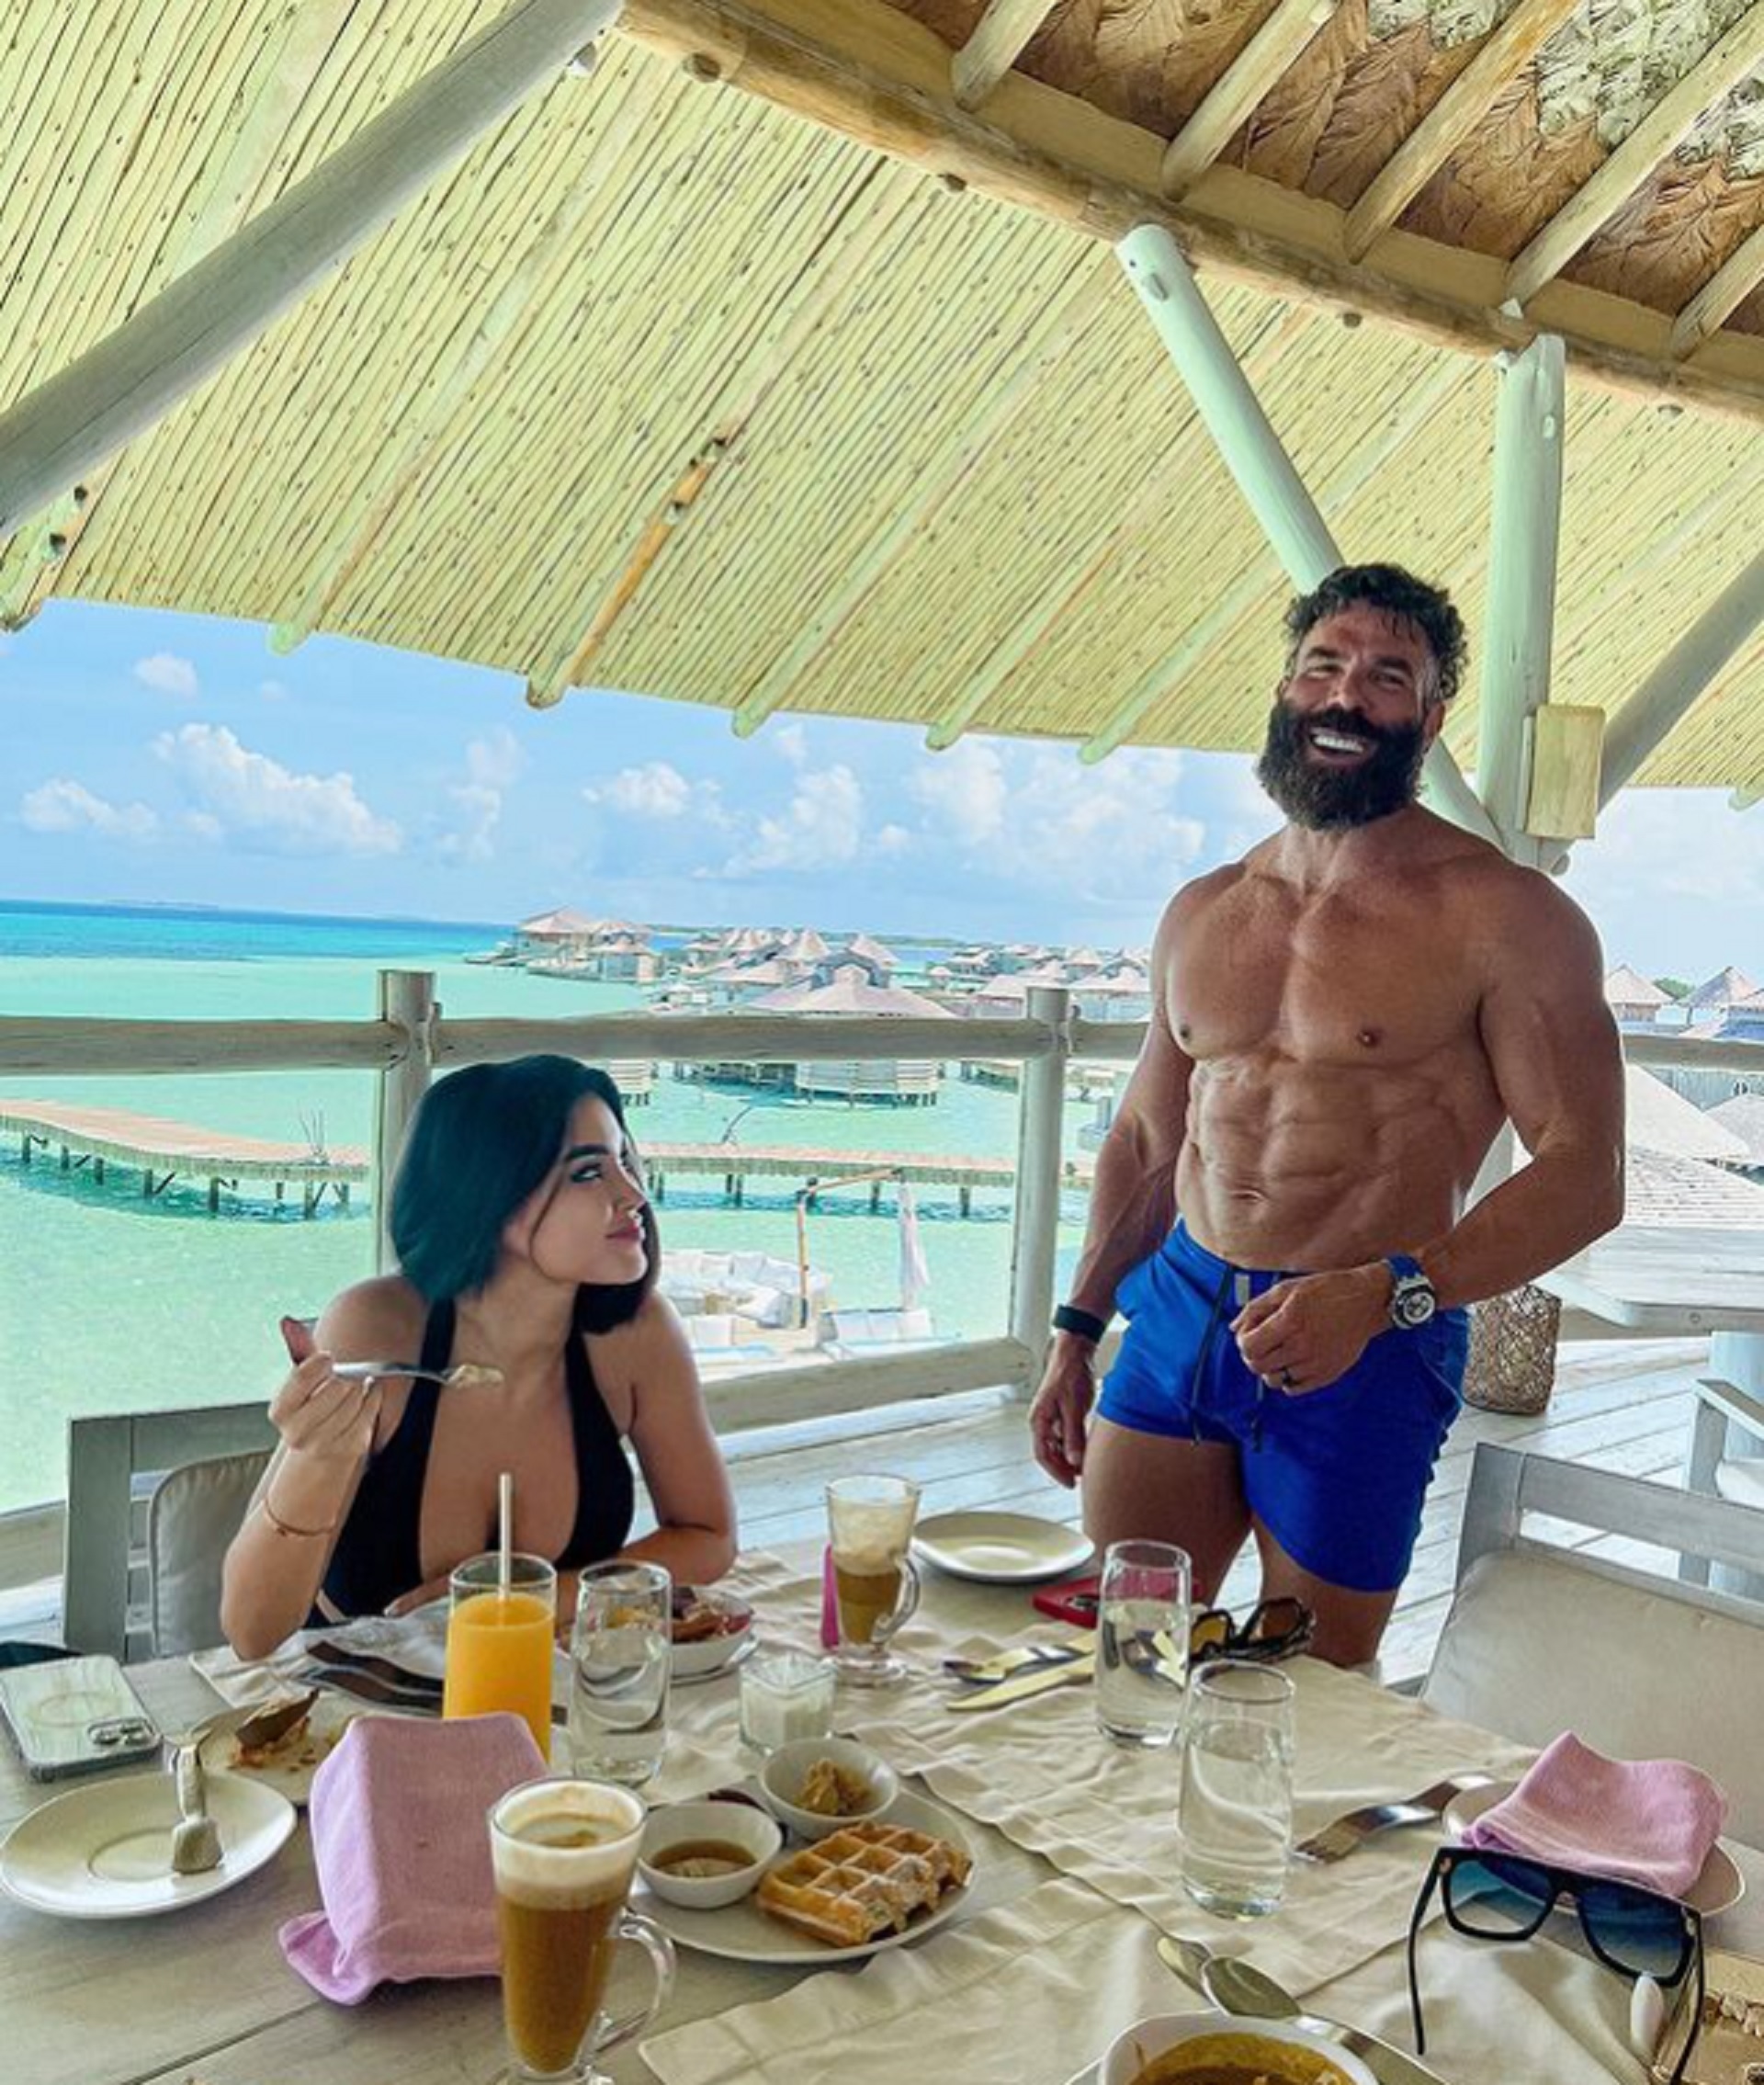 Who is Dan Bilzerian and why is he famous?